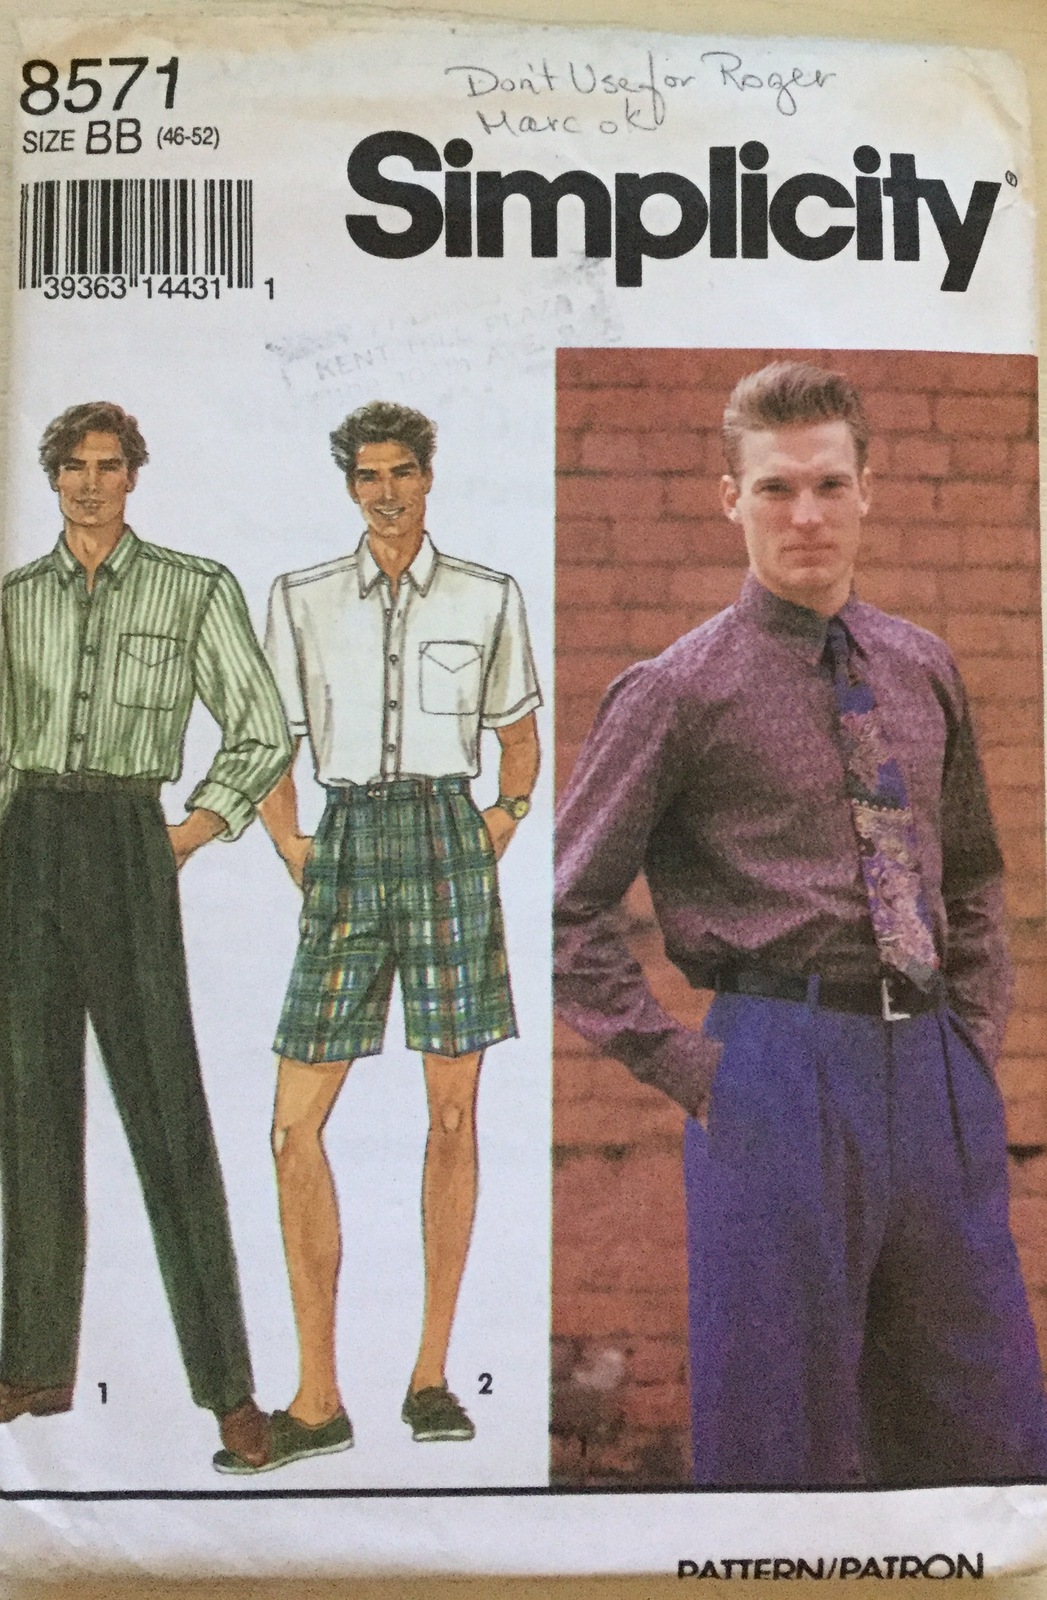 Simplicity 8571 Men's Button Front Shirts Size BB (46-52) - Sewing Patterns